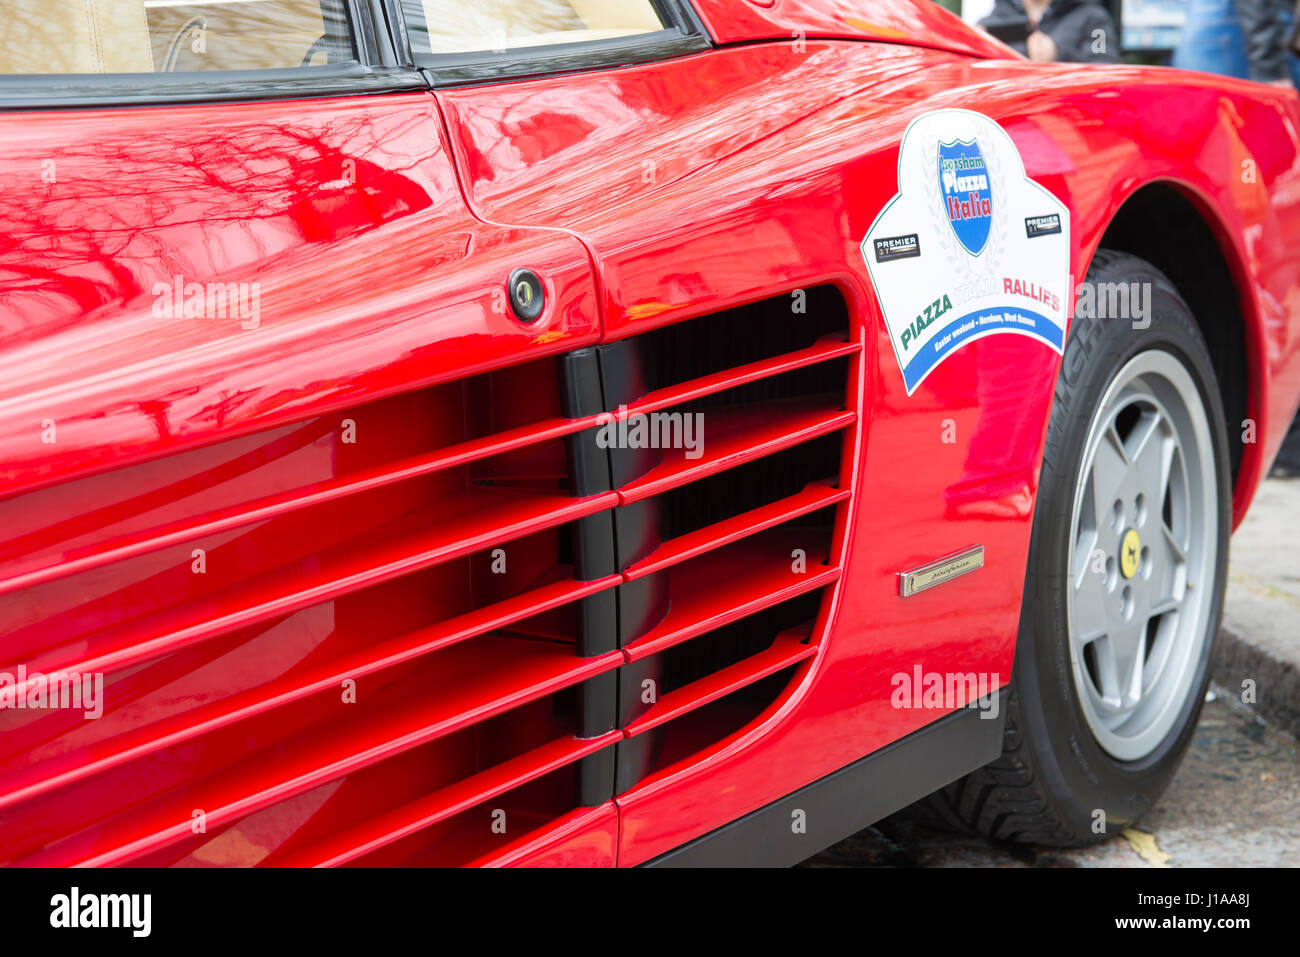 The characteristic straked door louvres of the Ferrari Testarossa deliver air to the twin side-mounted radiators. Stock Photo